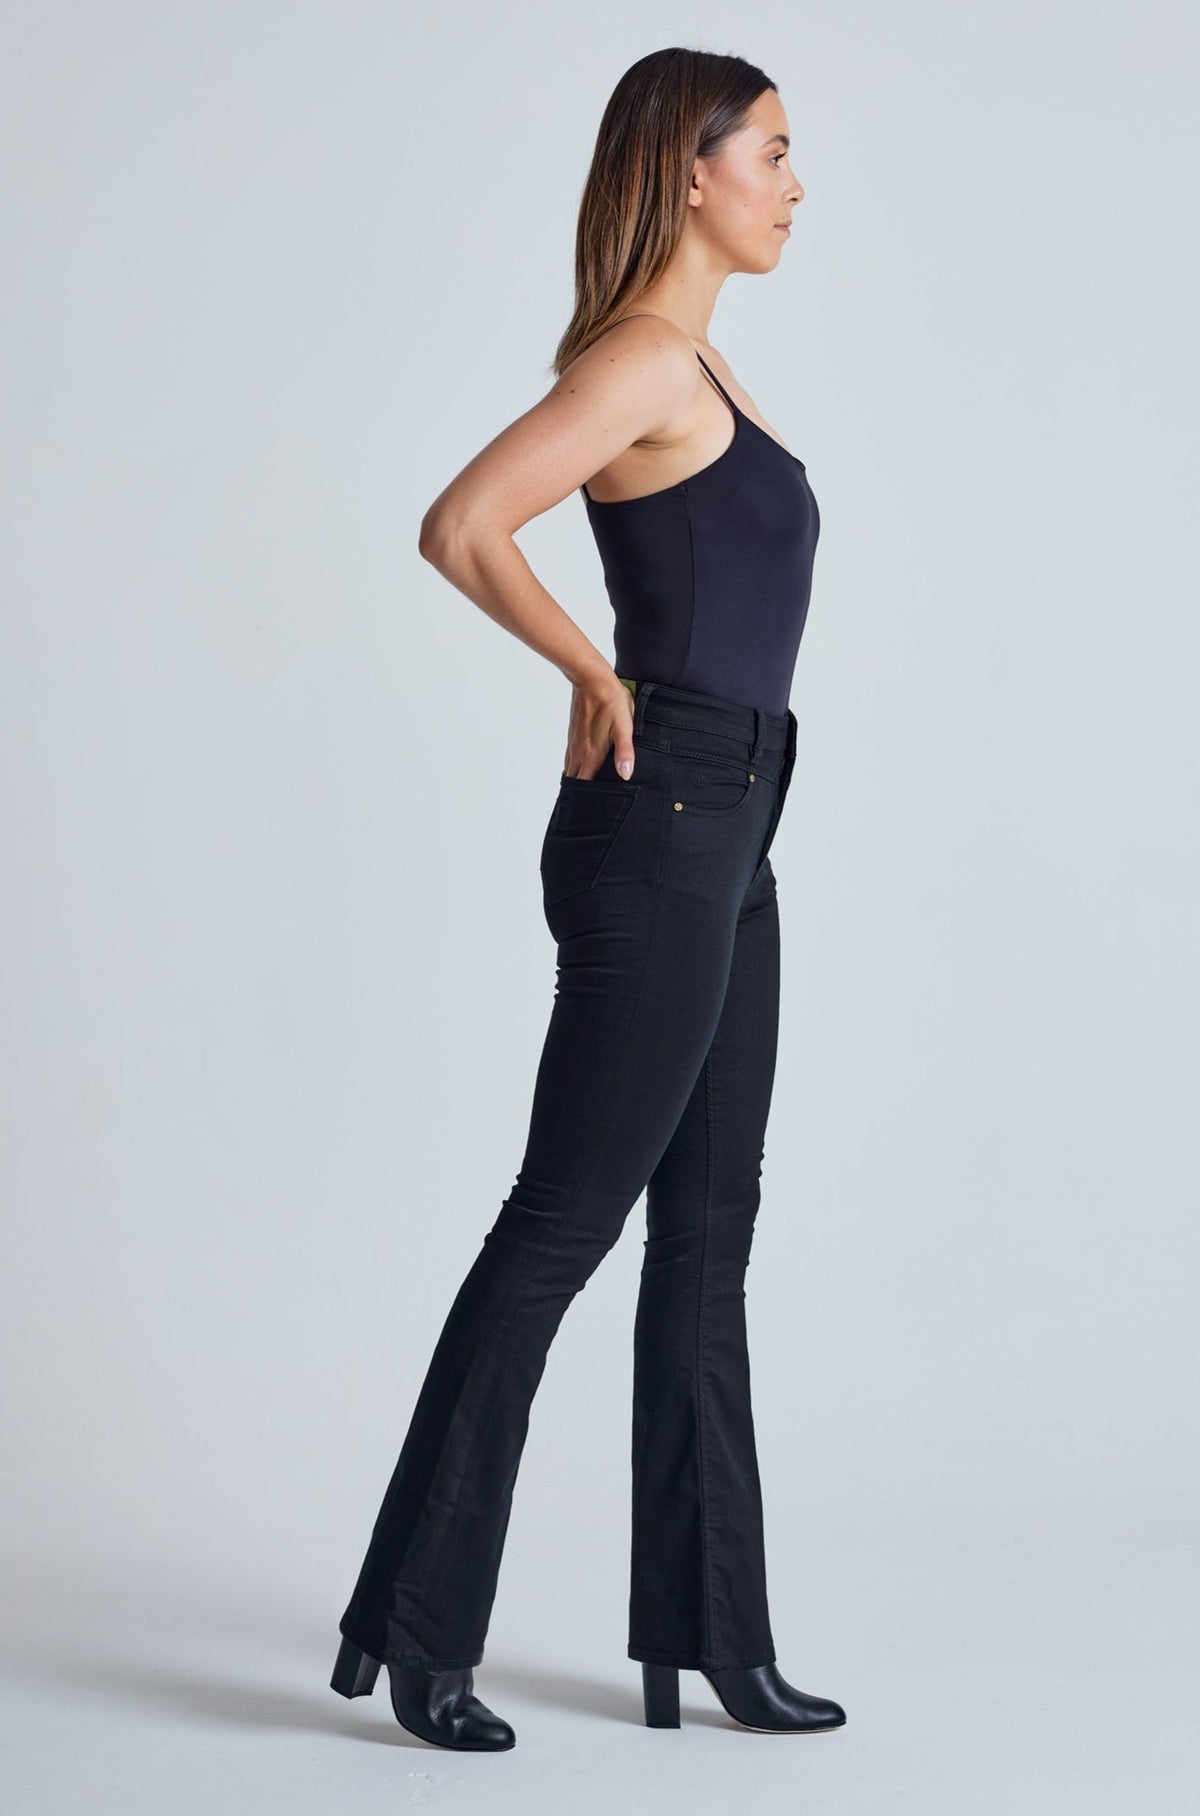 Ebony Mavis High Waisted Skinny Flared Jeans - GOTS Certified Organic Cotton and Recycled Polyester